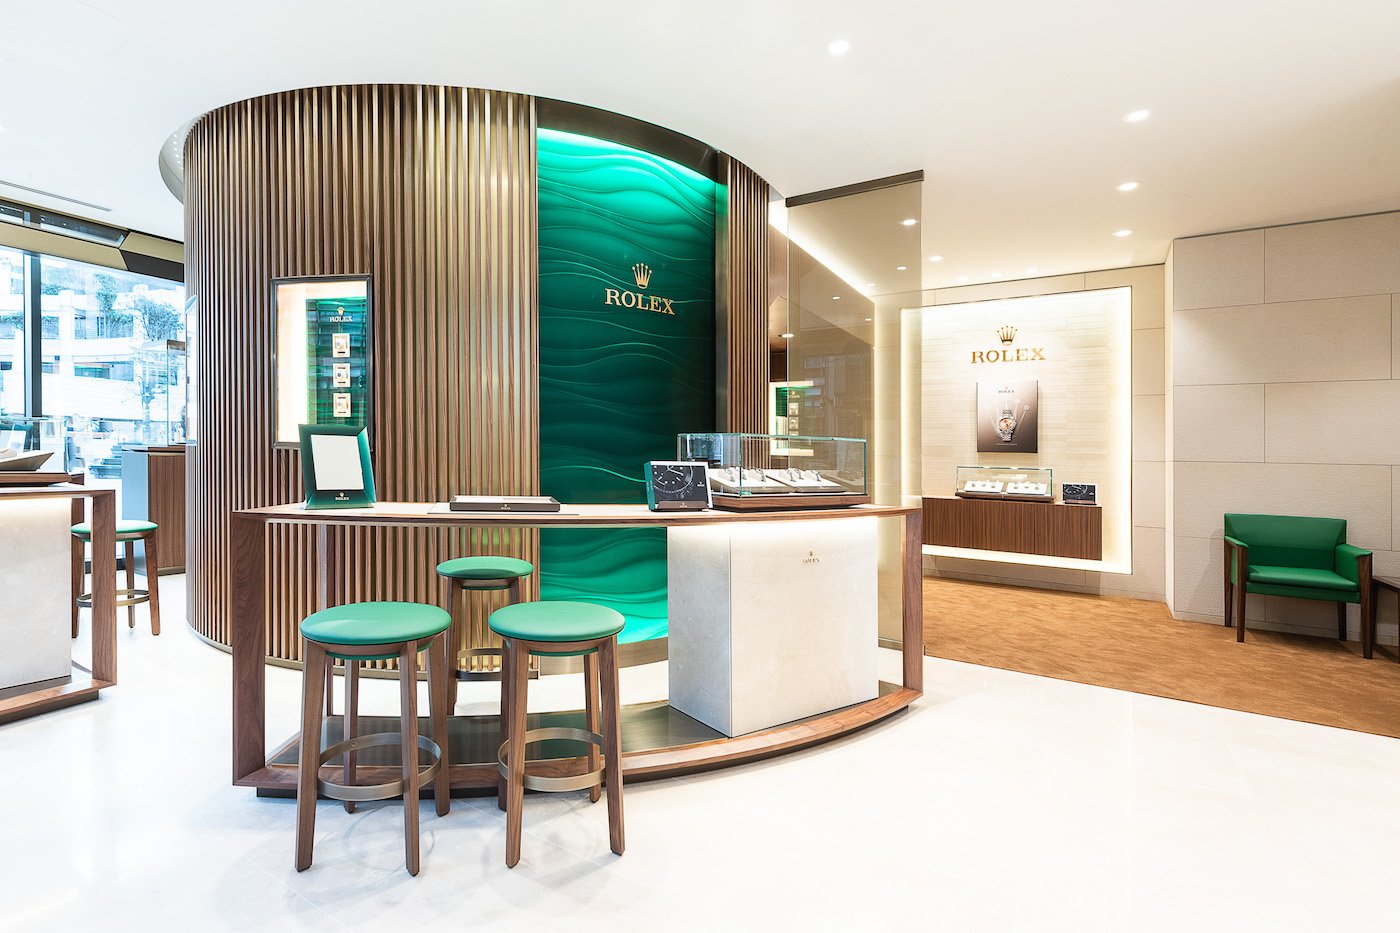 Richemont Plans to Open Multibrand Watch Stores in the United